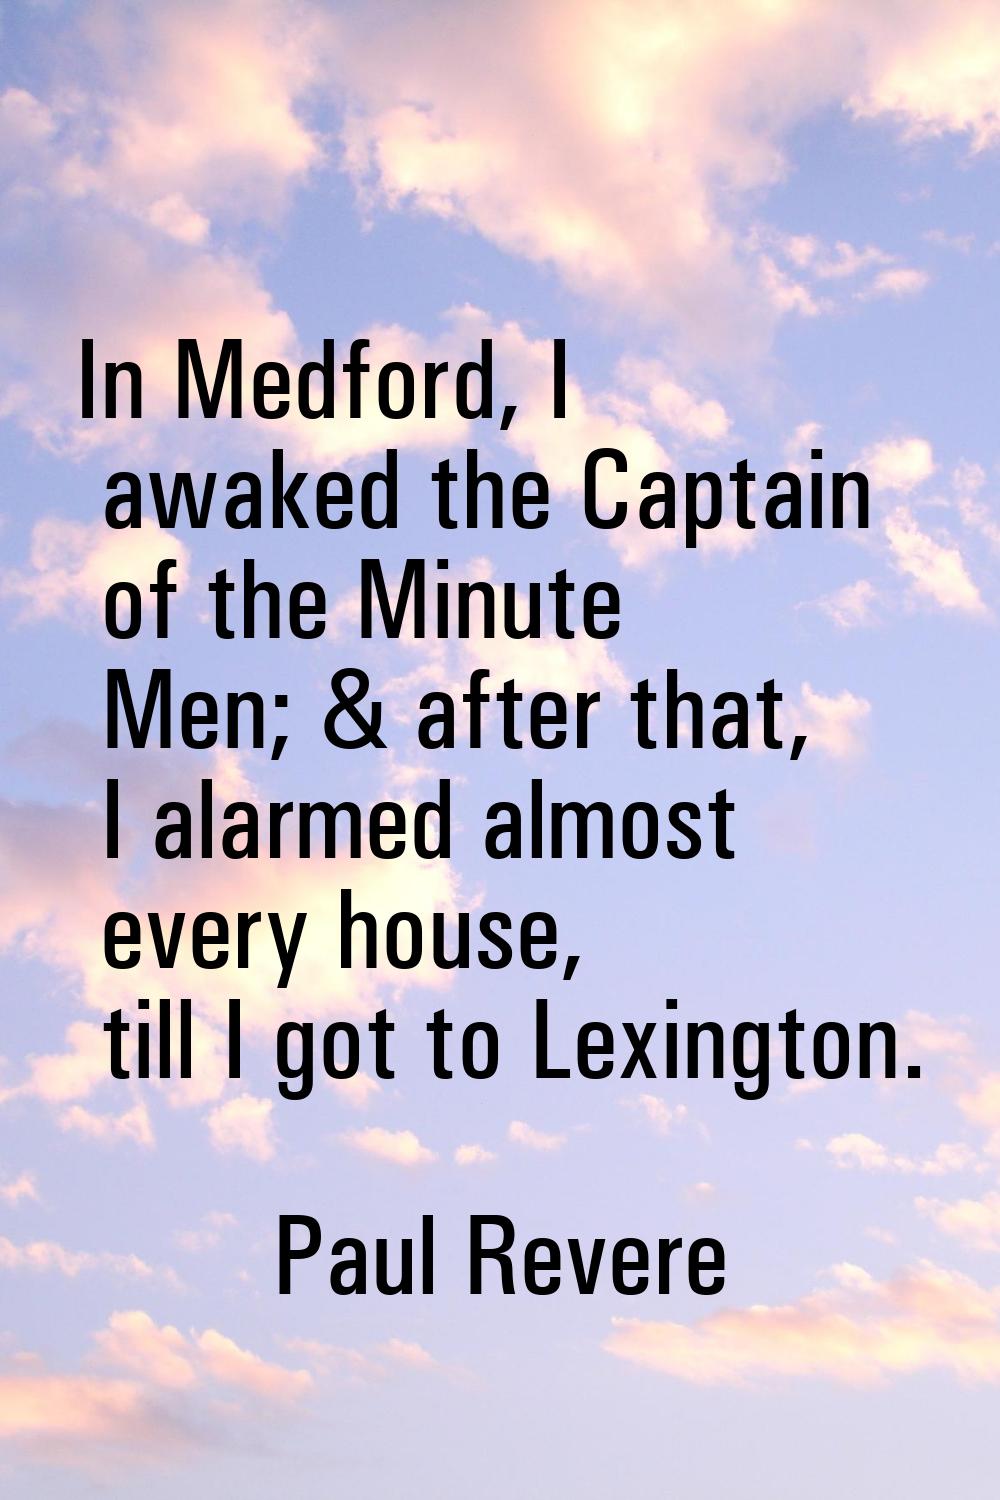 In Medford, I awaked the Captain of the Minute Men; & after that, I alarmed almost every house, til